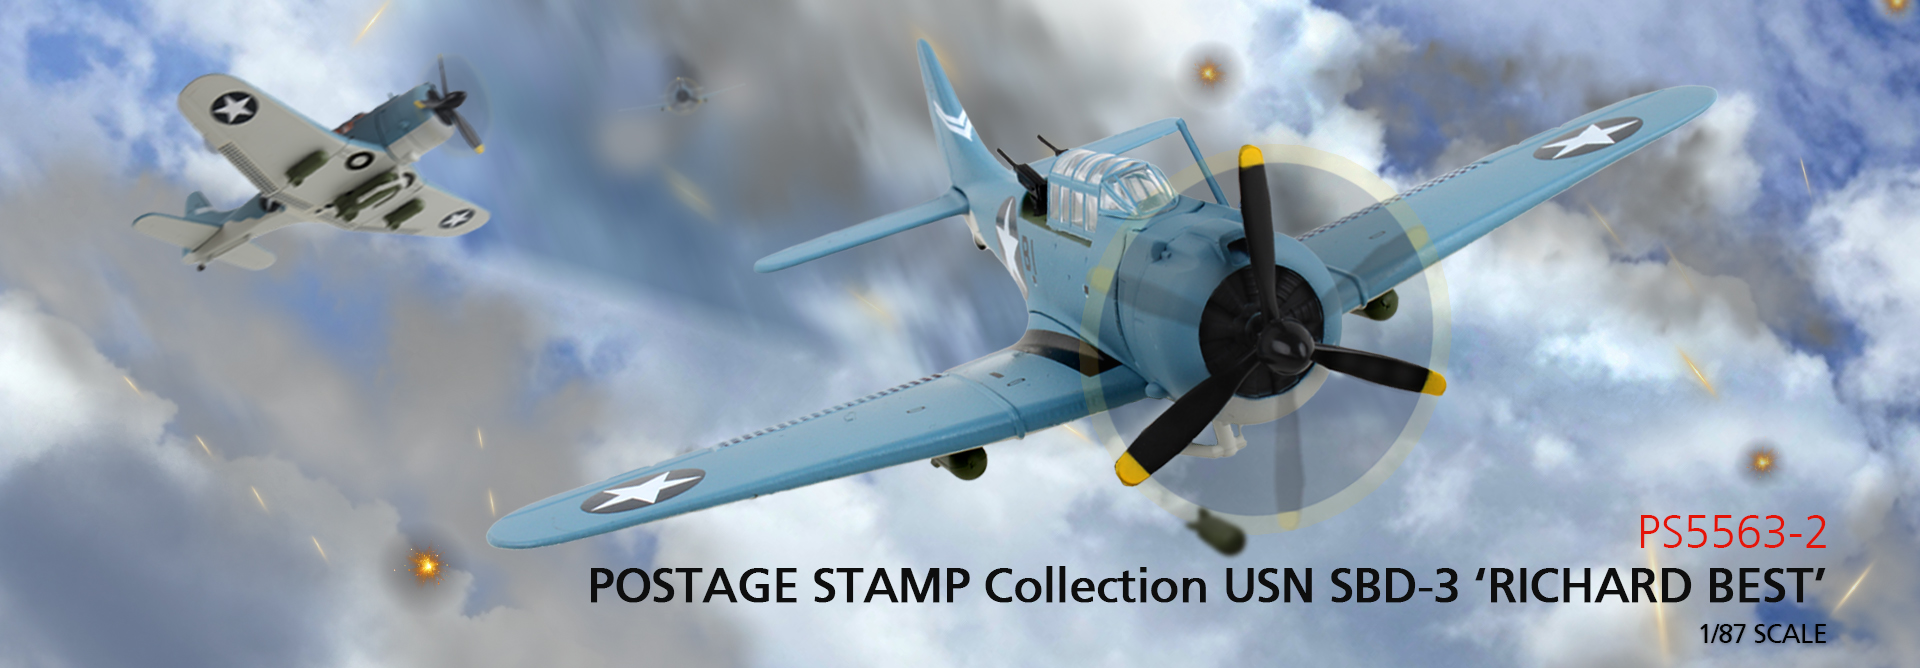 PS5563-2 POSTAGE STAMP Collection USN SBD-3 ‘RICHARD BEST’ 1/87 SCALE